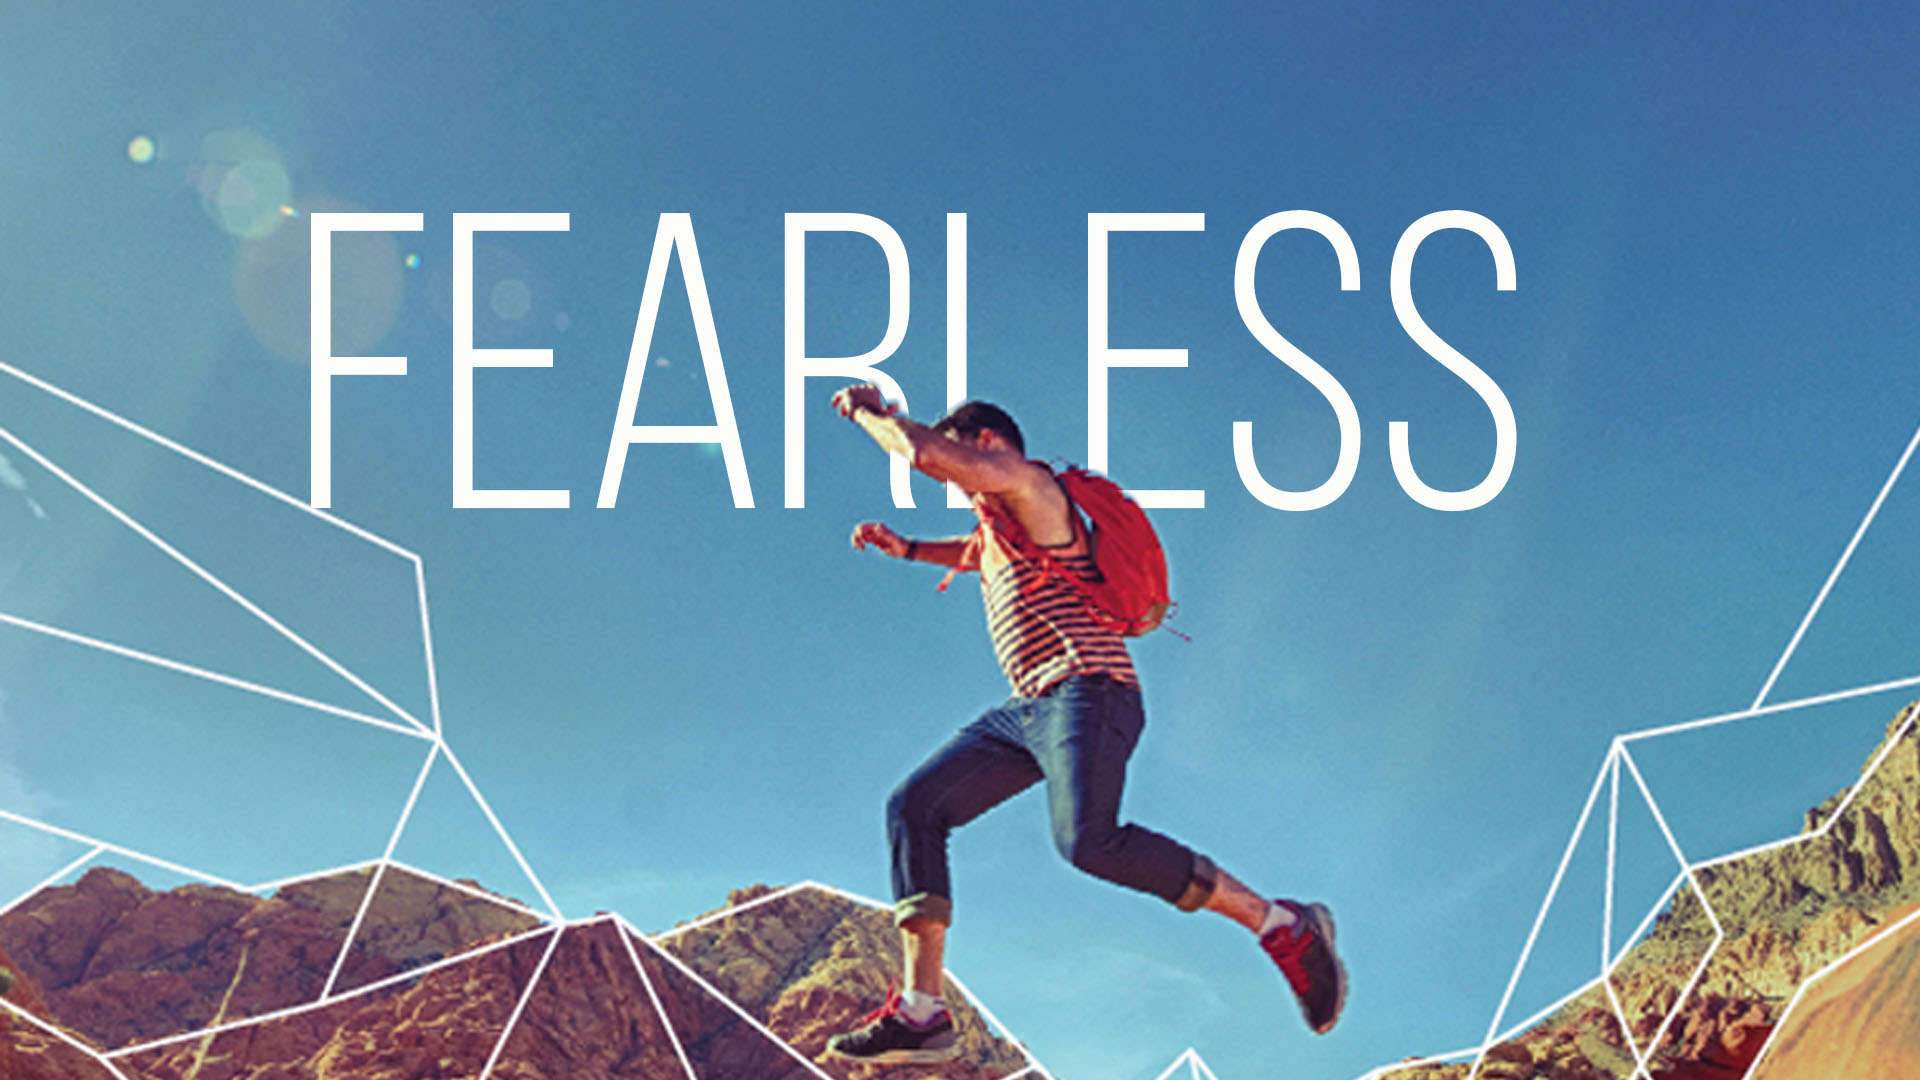 Fearless (For Teens)

8-Week Program
Tuesdays | 5:00-6:00pm
February 7 - March 28
